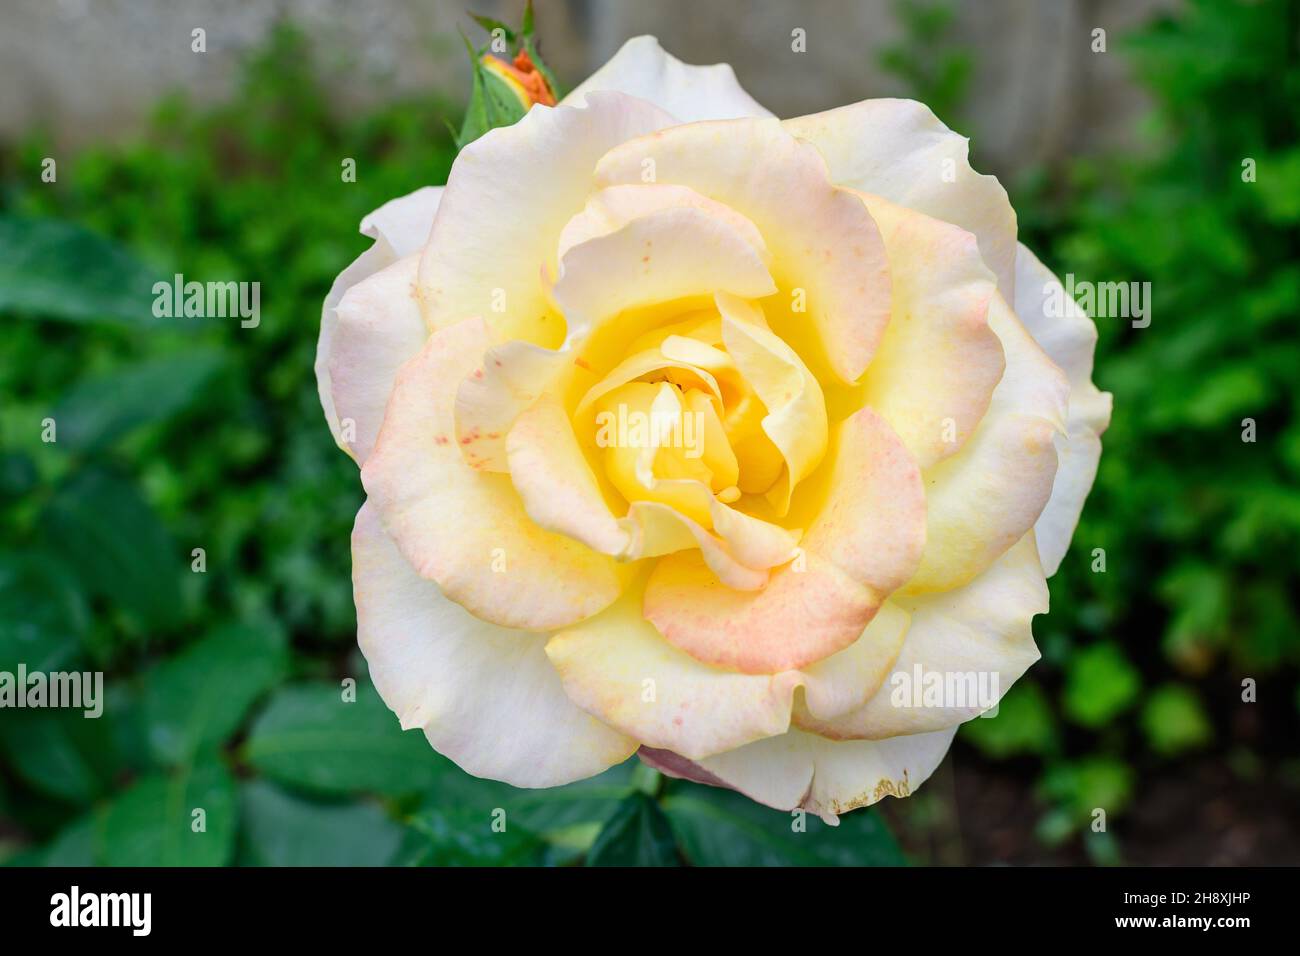 Large green bush with one fresh vivid yellow rose and green leaves in a garden in a sunny summer day, beautiful outdoor floral background photographed Stock Photo